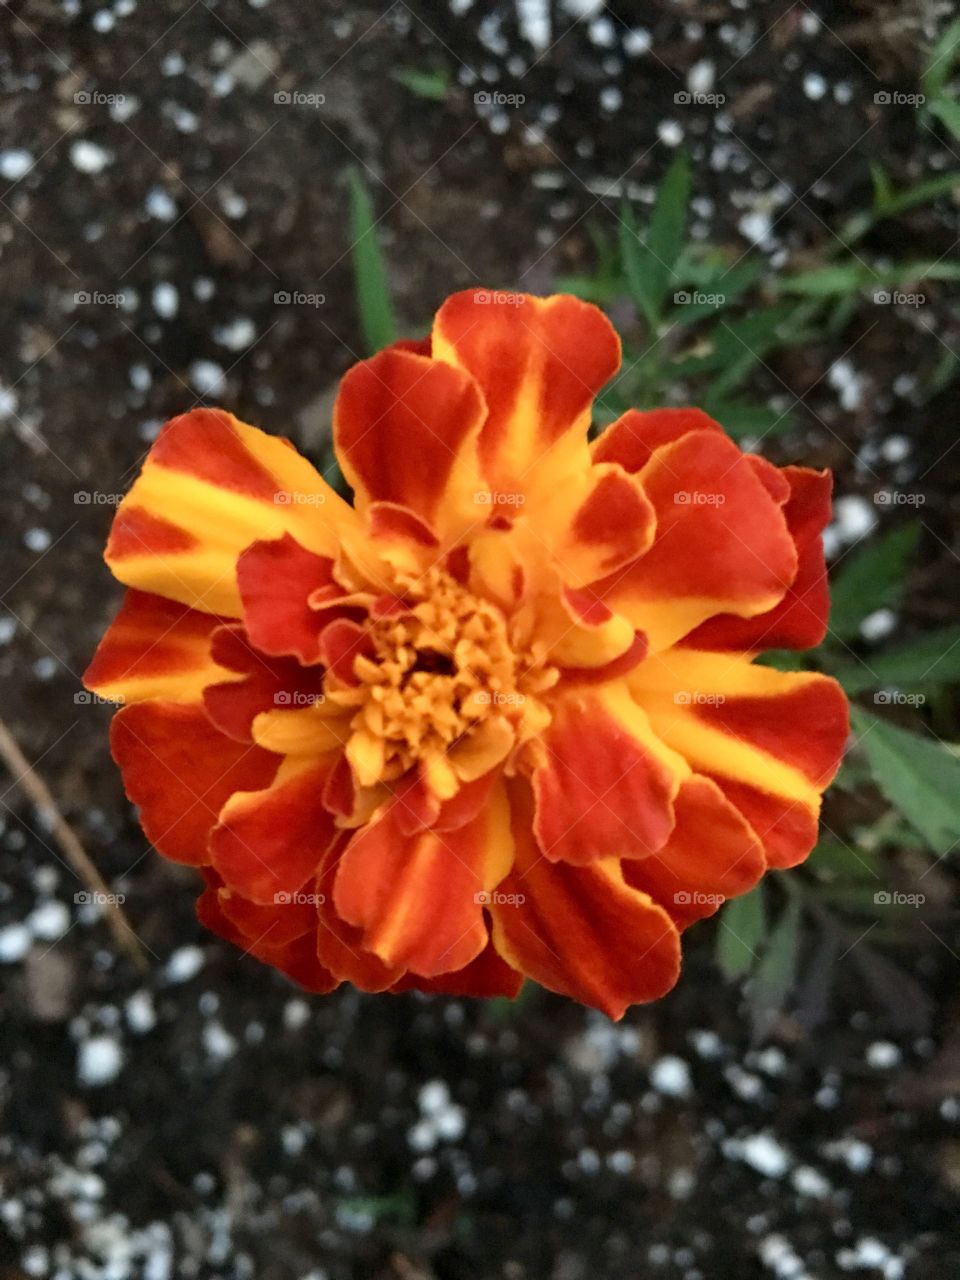 Marigold Flower in Orange and Yellow